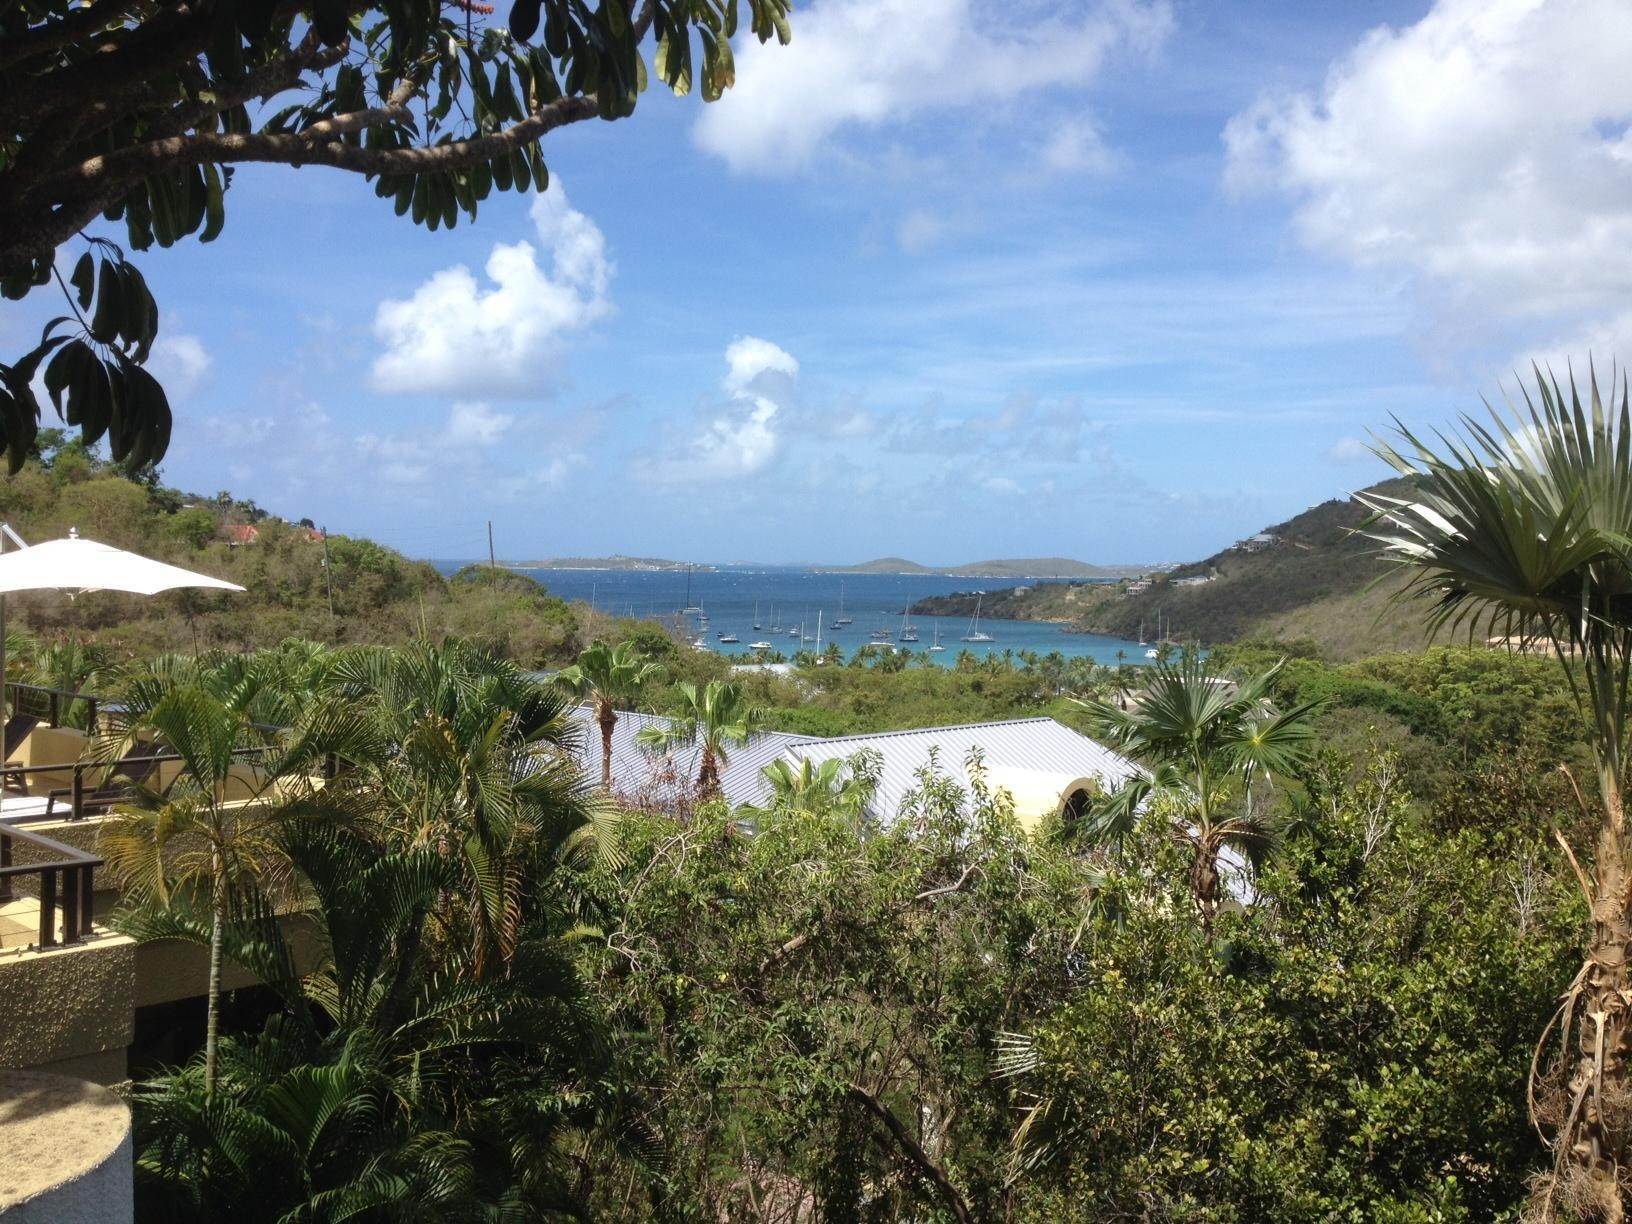 fractional ownership prop for Sale at Chocolate Hole St John, Virgin Islands 00830 United States Virgin Islands